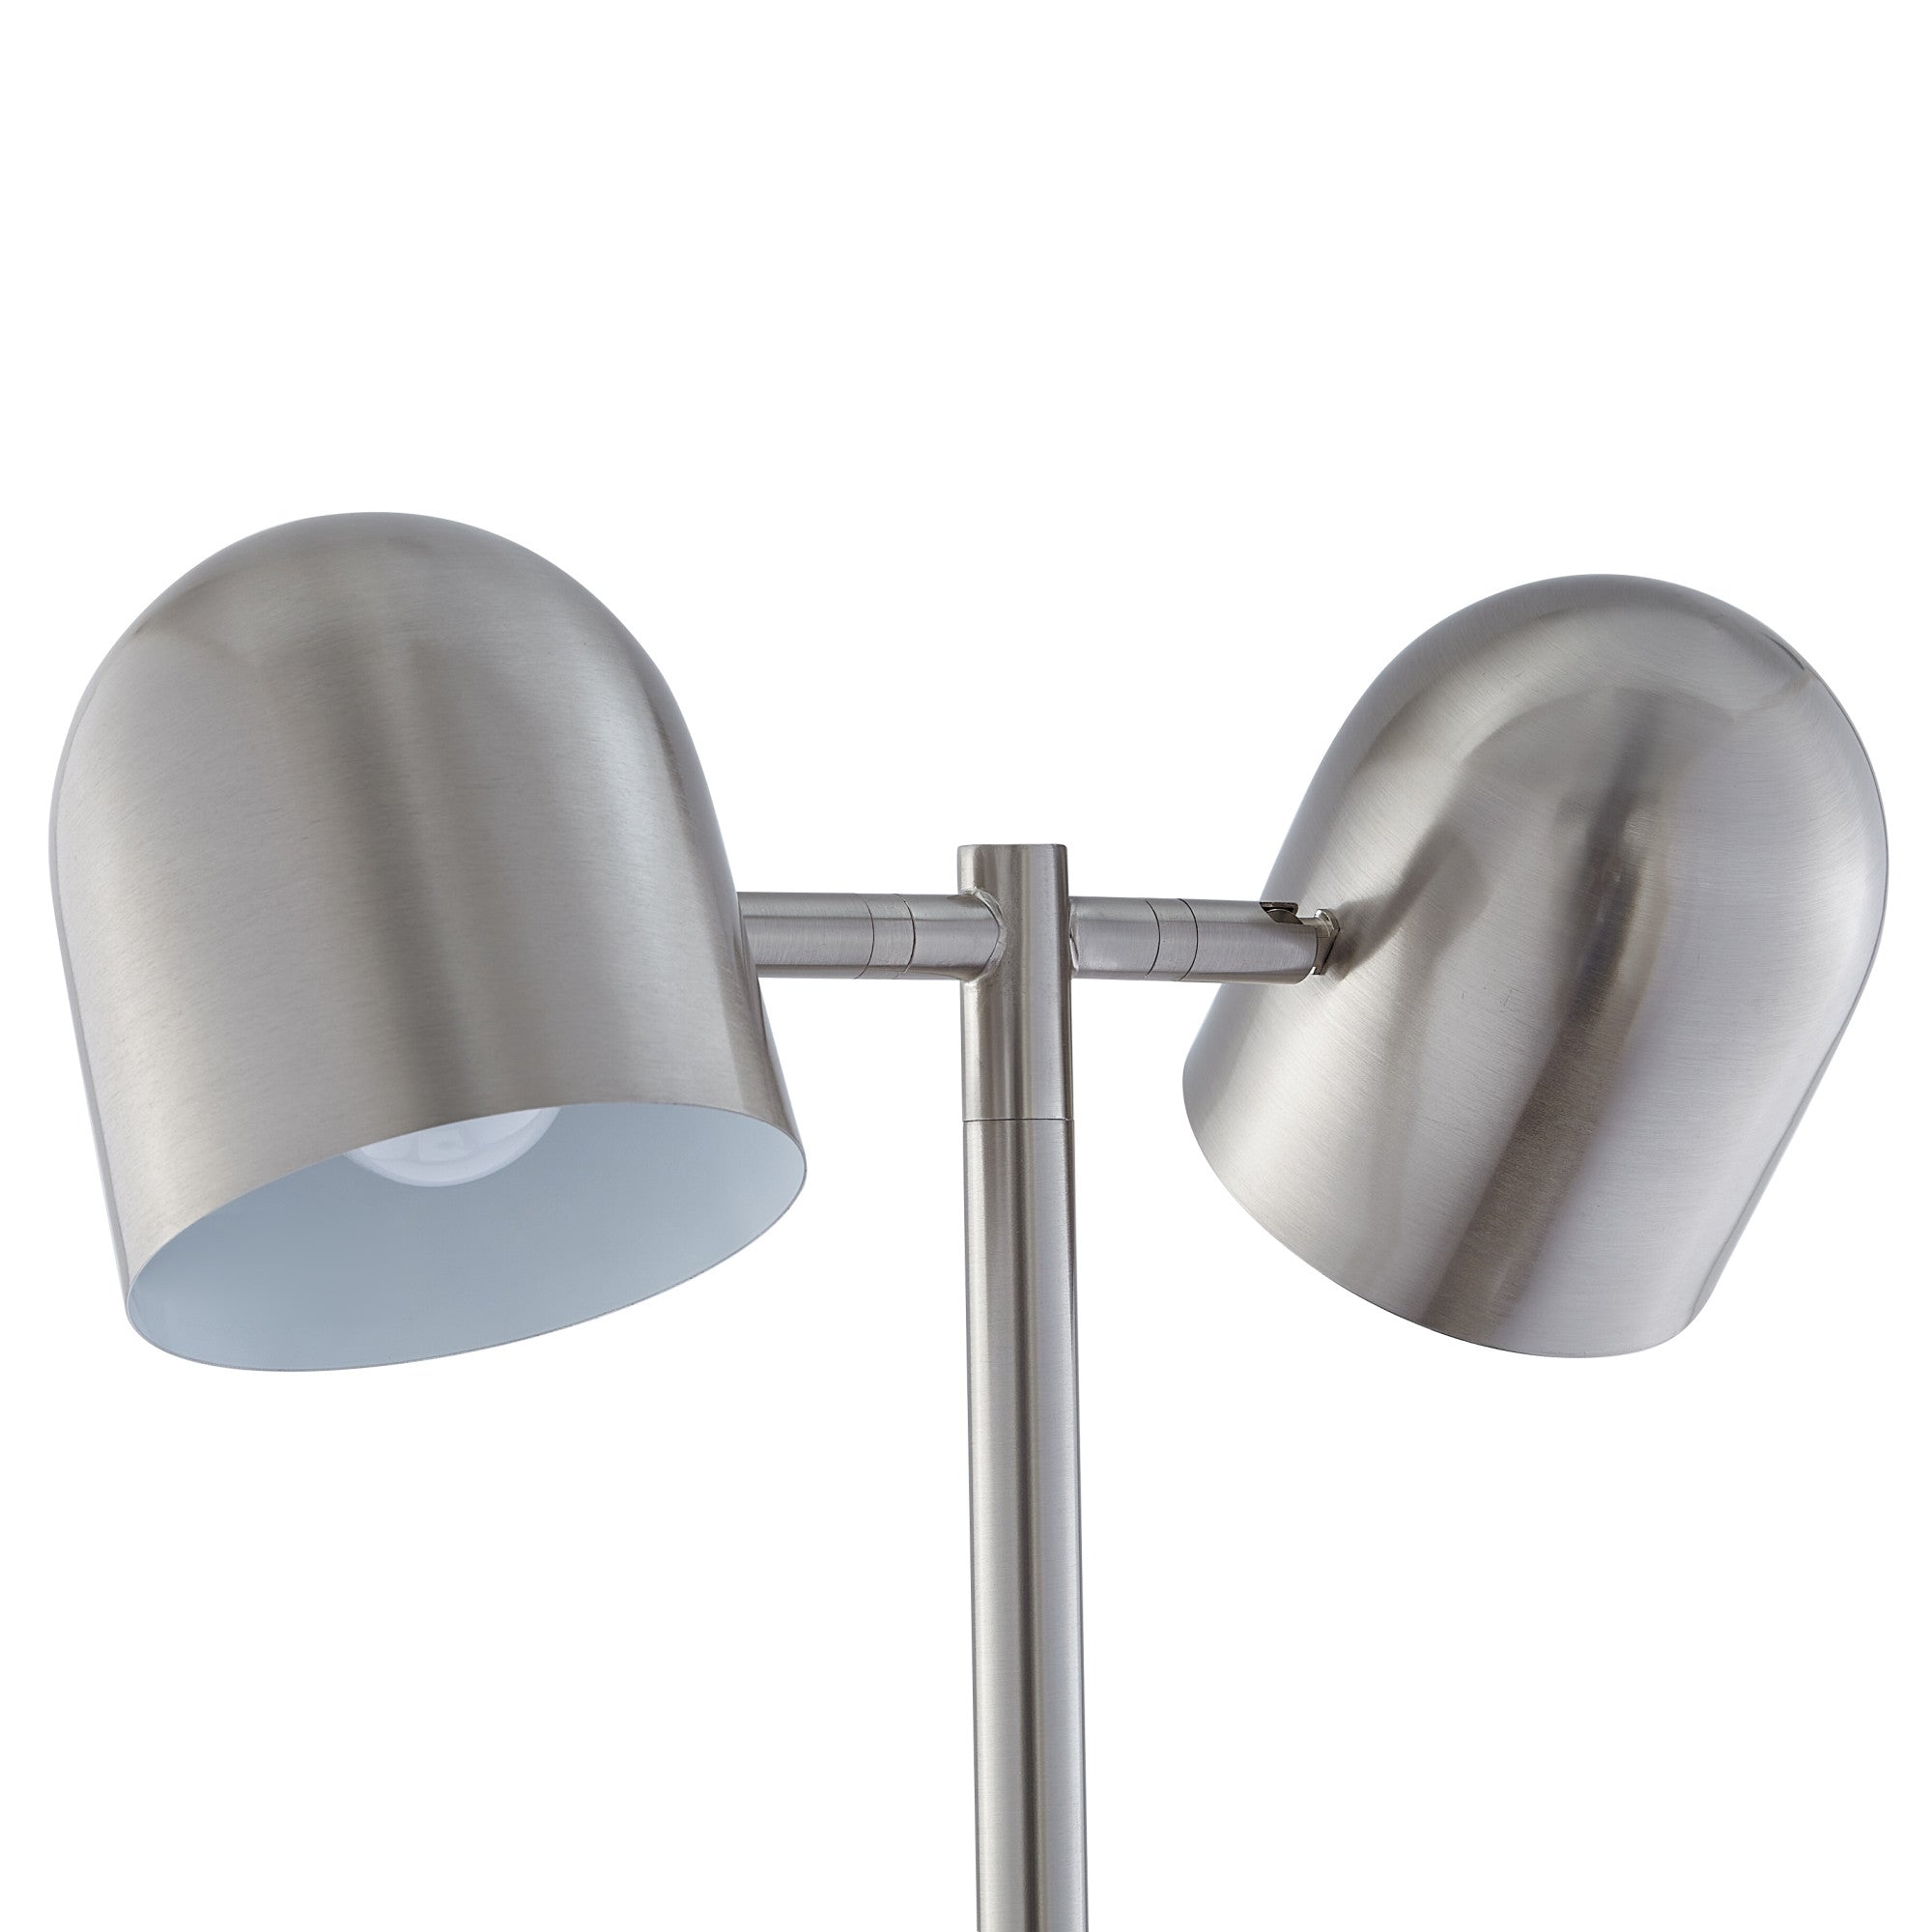 58" Chrome and White Two Light Floor Lamp With Silver Metallic Bell Shades